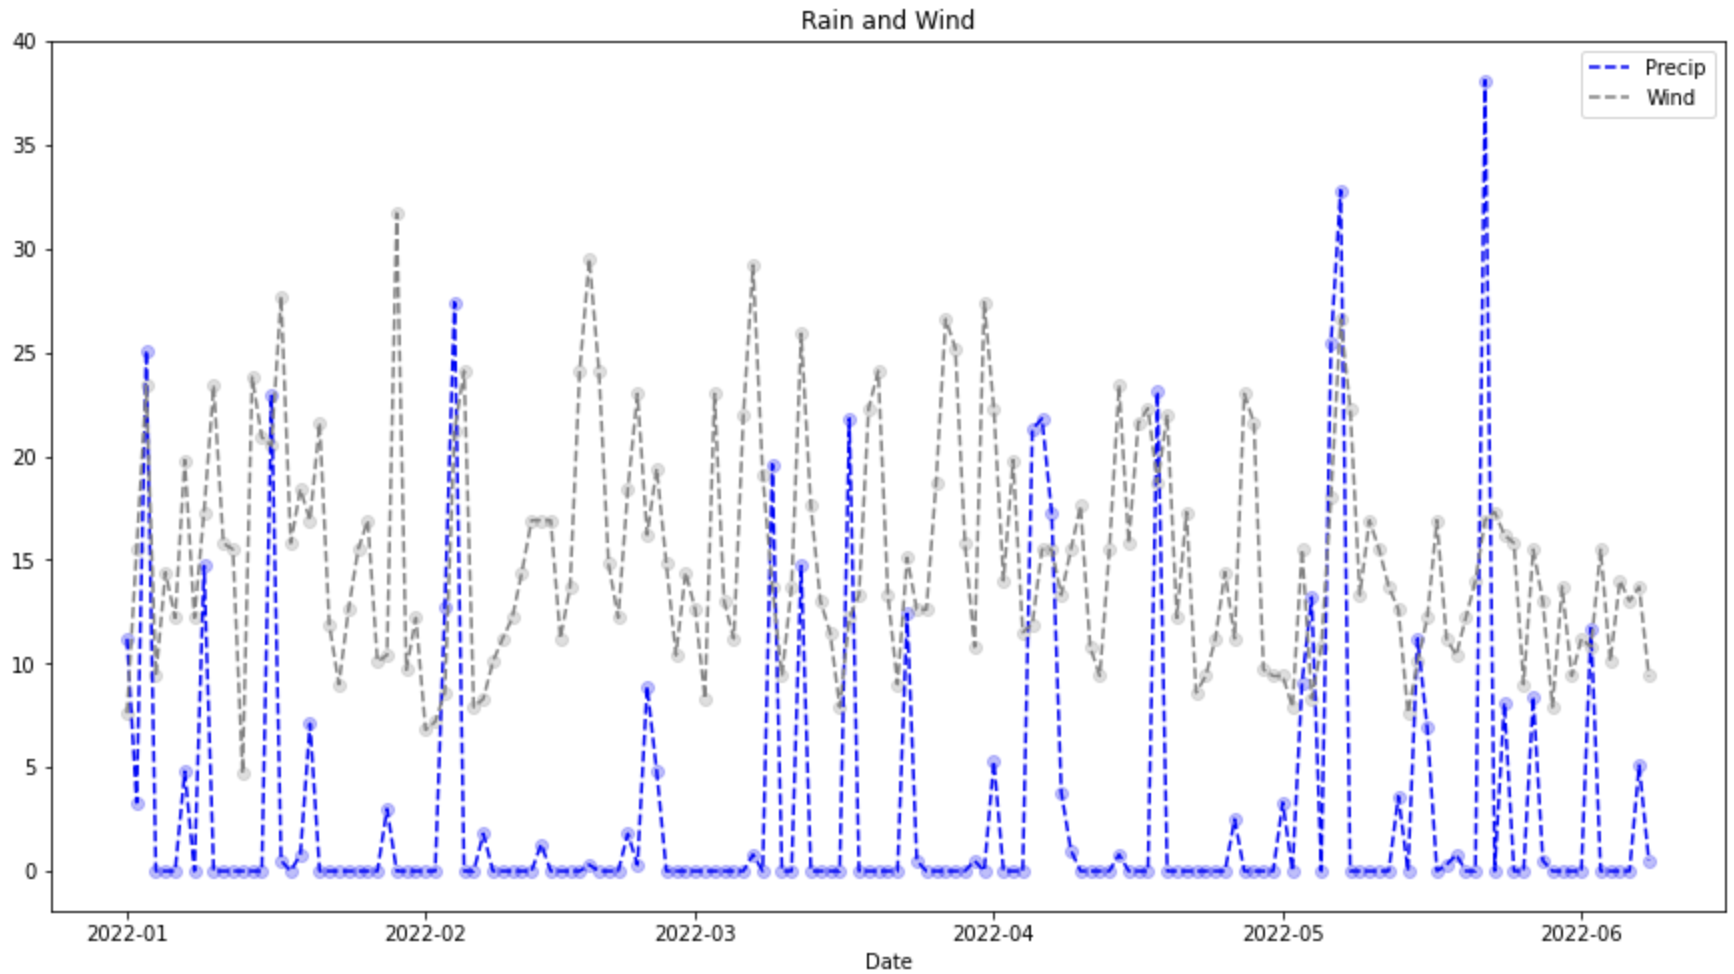 Precip and Wind Over Time